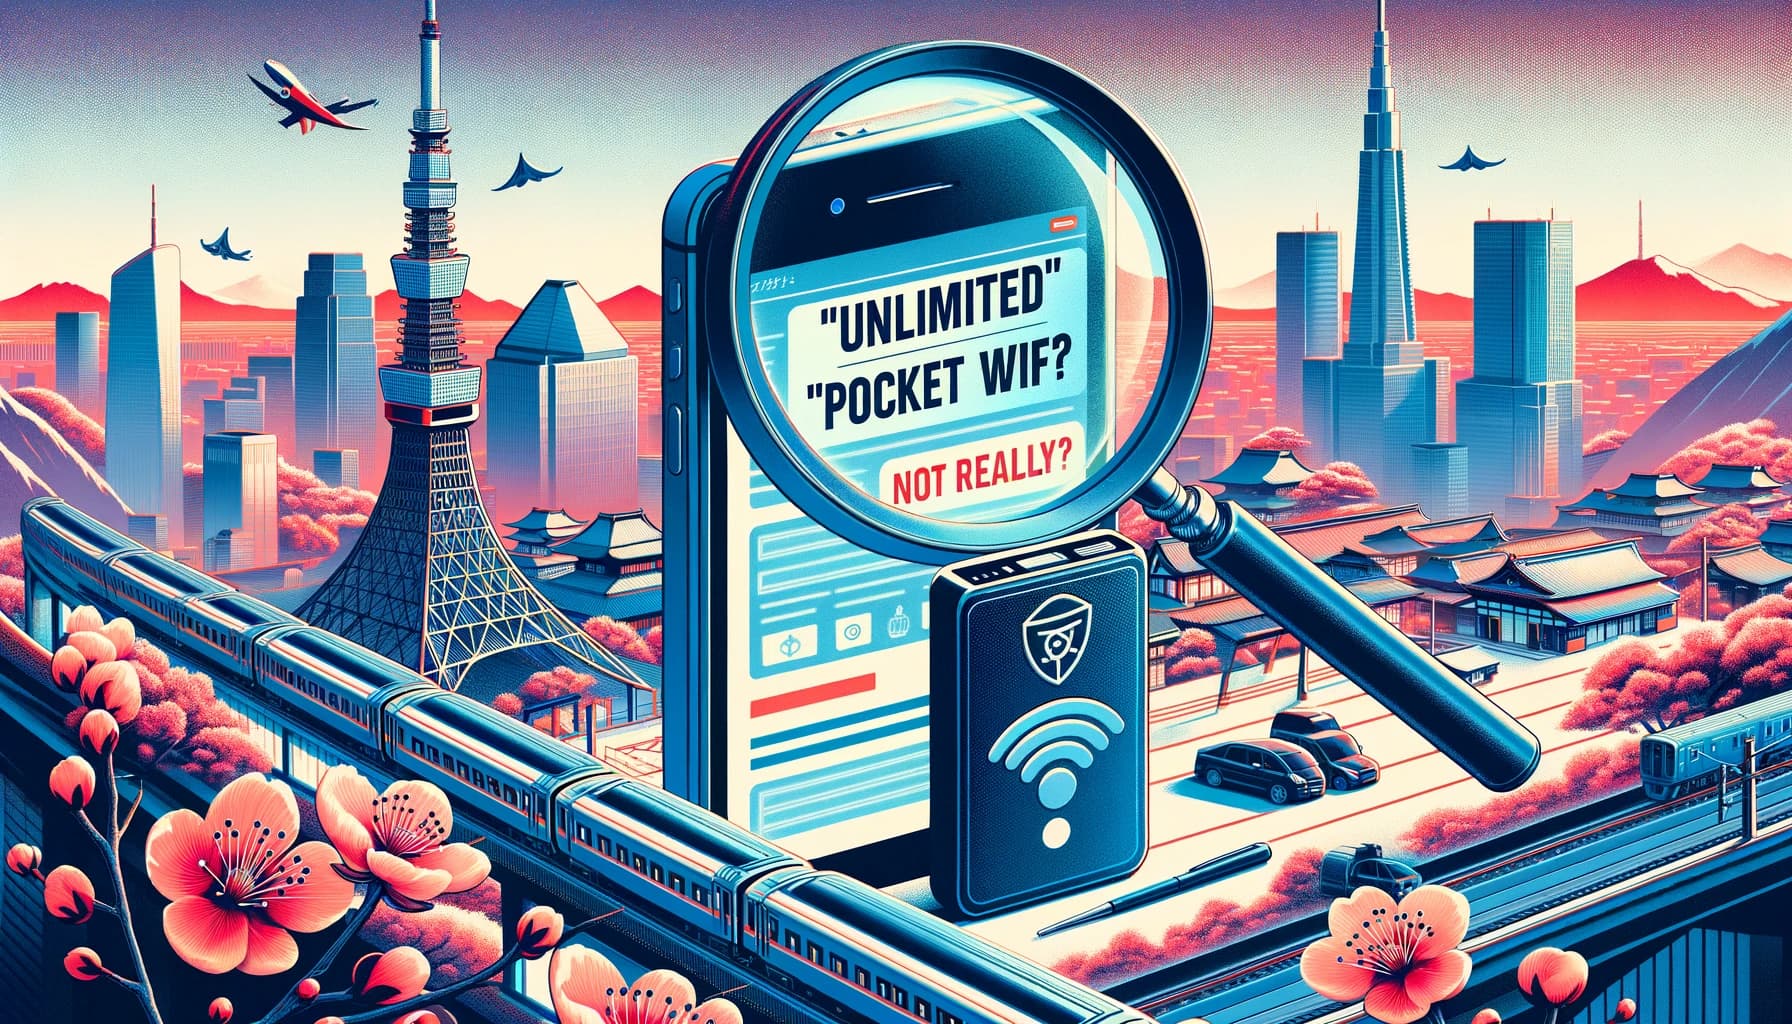 Does 'Unlimited Data' Really Exist in Japan Pocket WiFi Rental Plans? It's Unlikely.